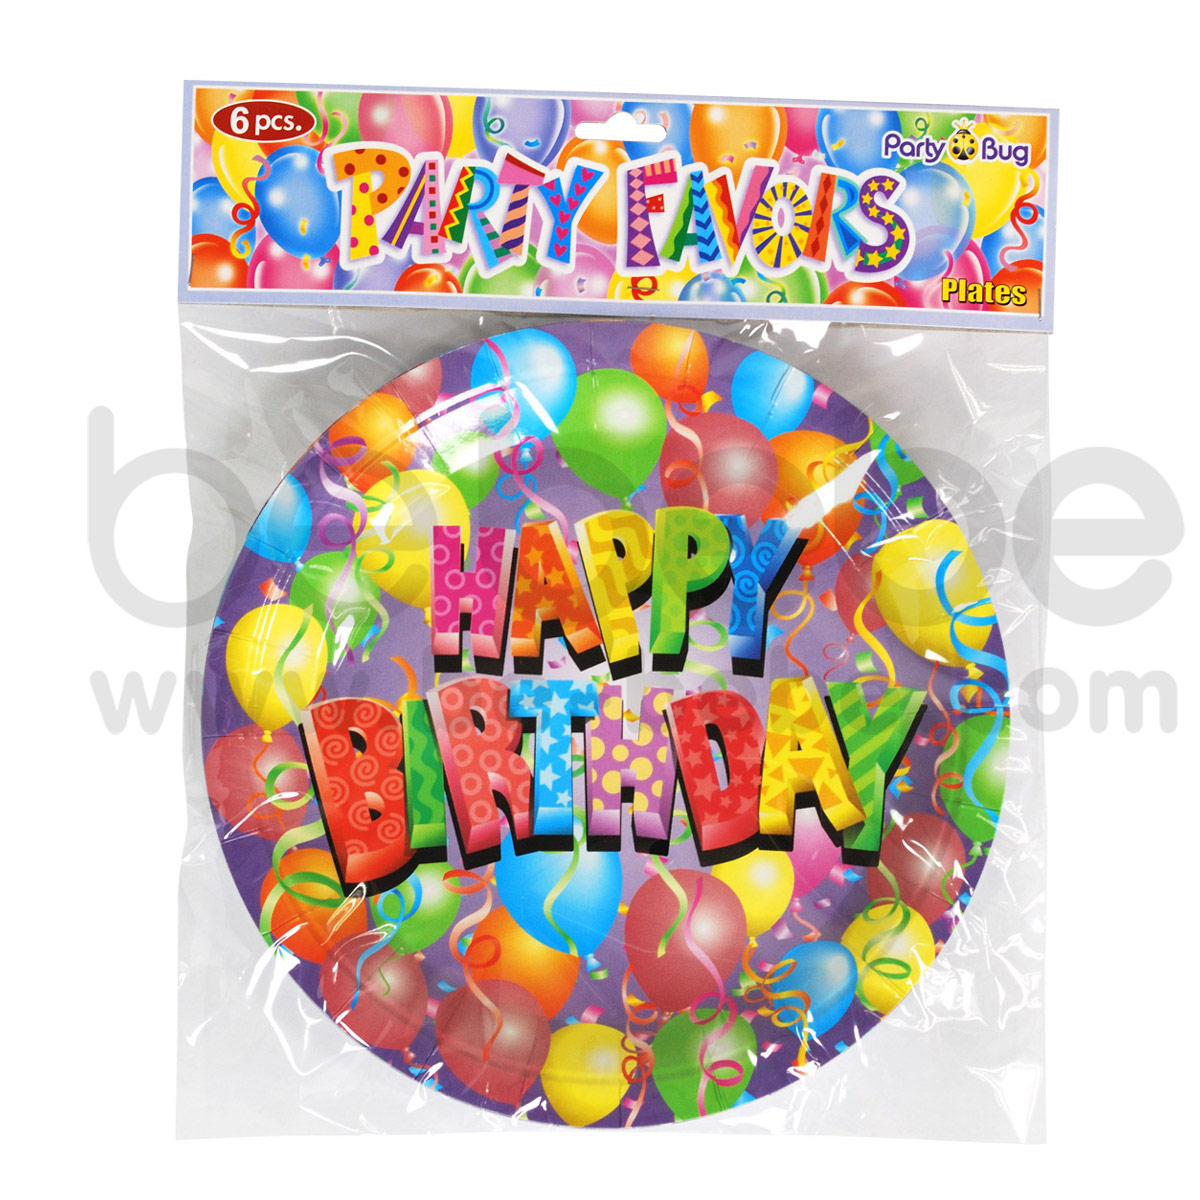 PARTY BUG : Paper plate 9 inch., 12 Packs